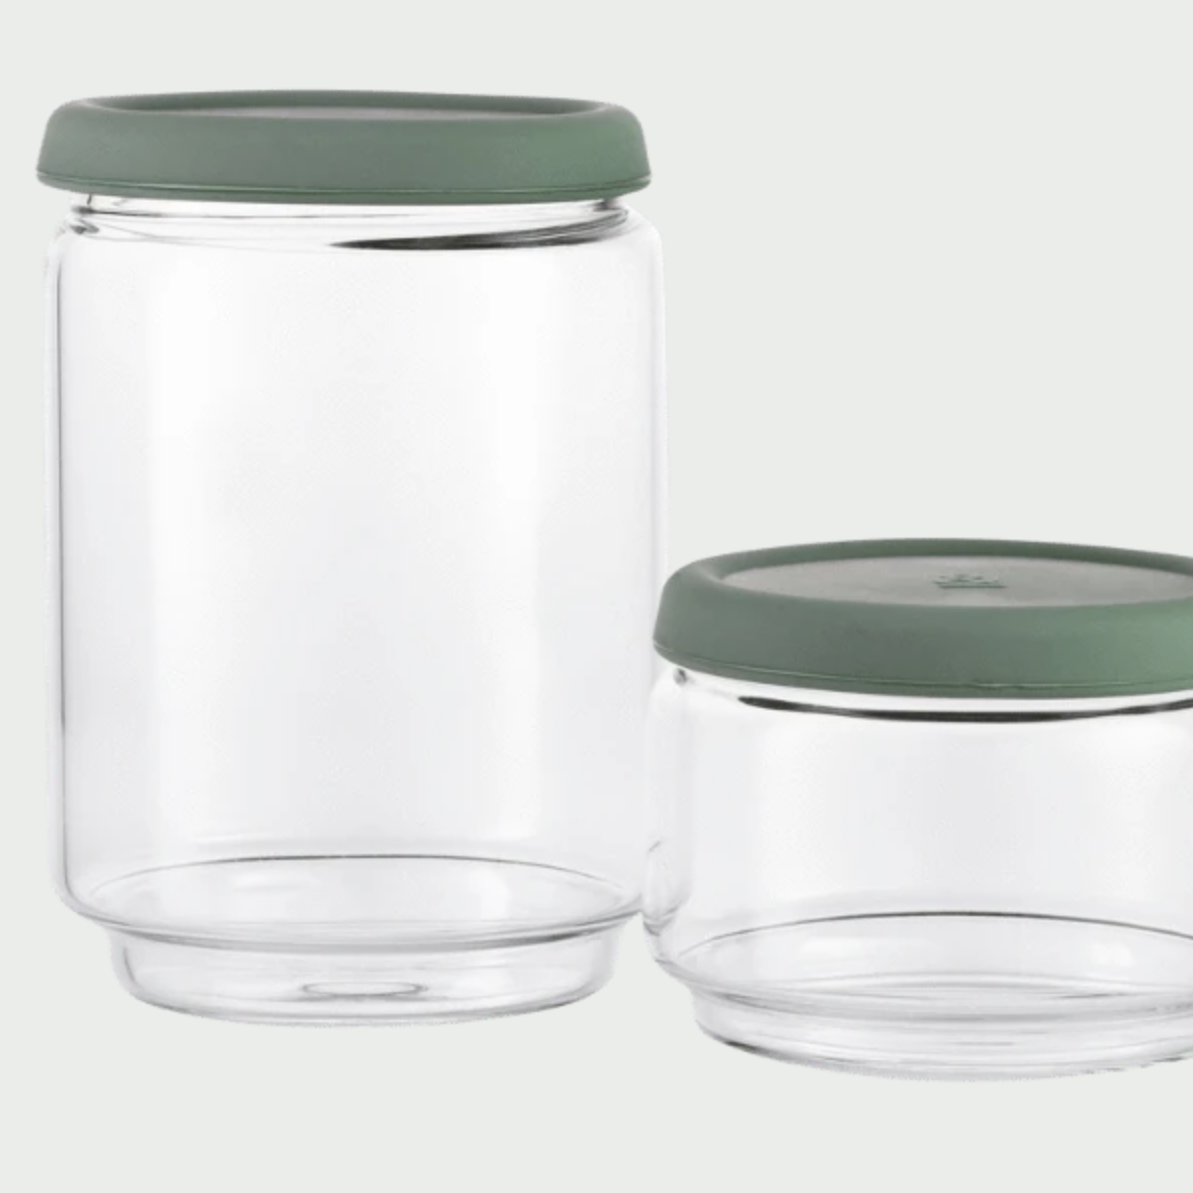 SEED & SPROUT BYRON PANTRY JAR SILICONE LIDS: PISTACHIO